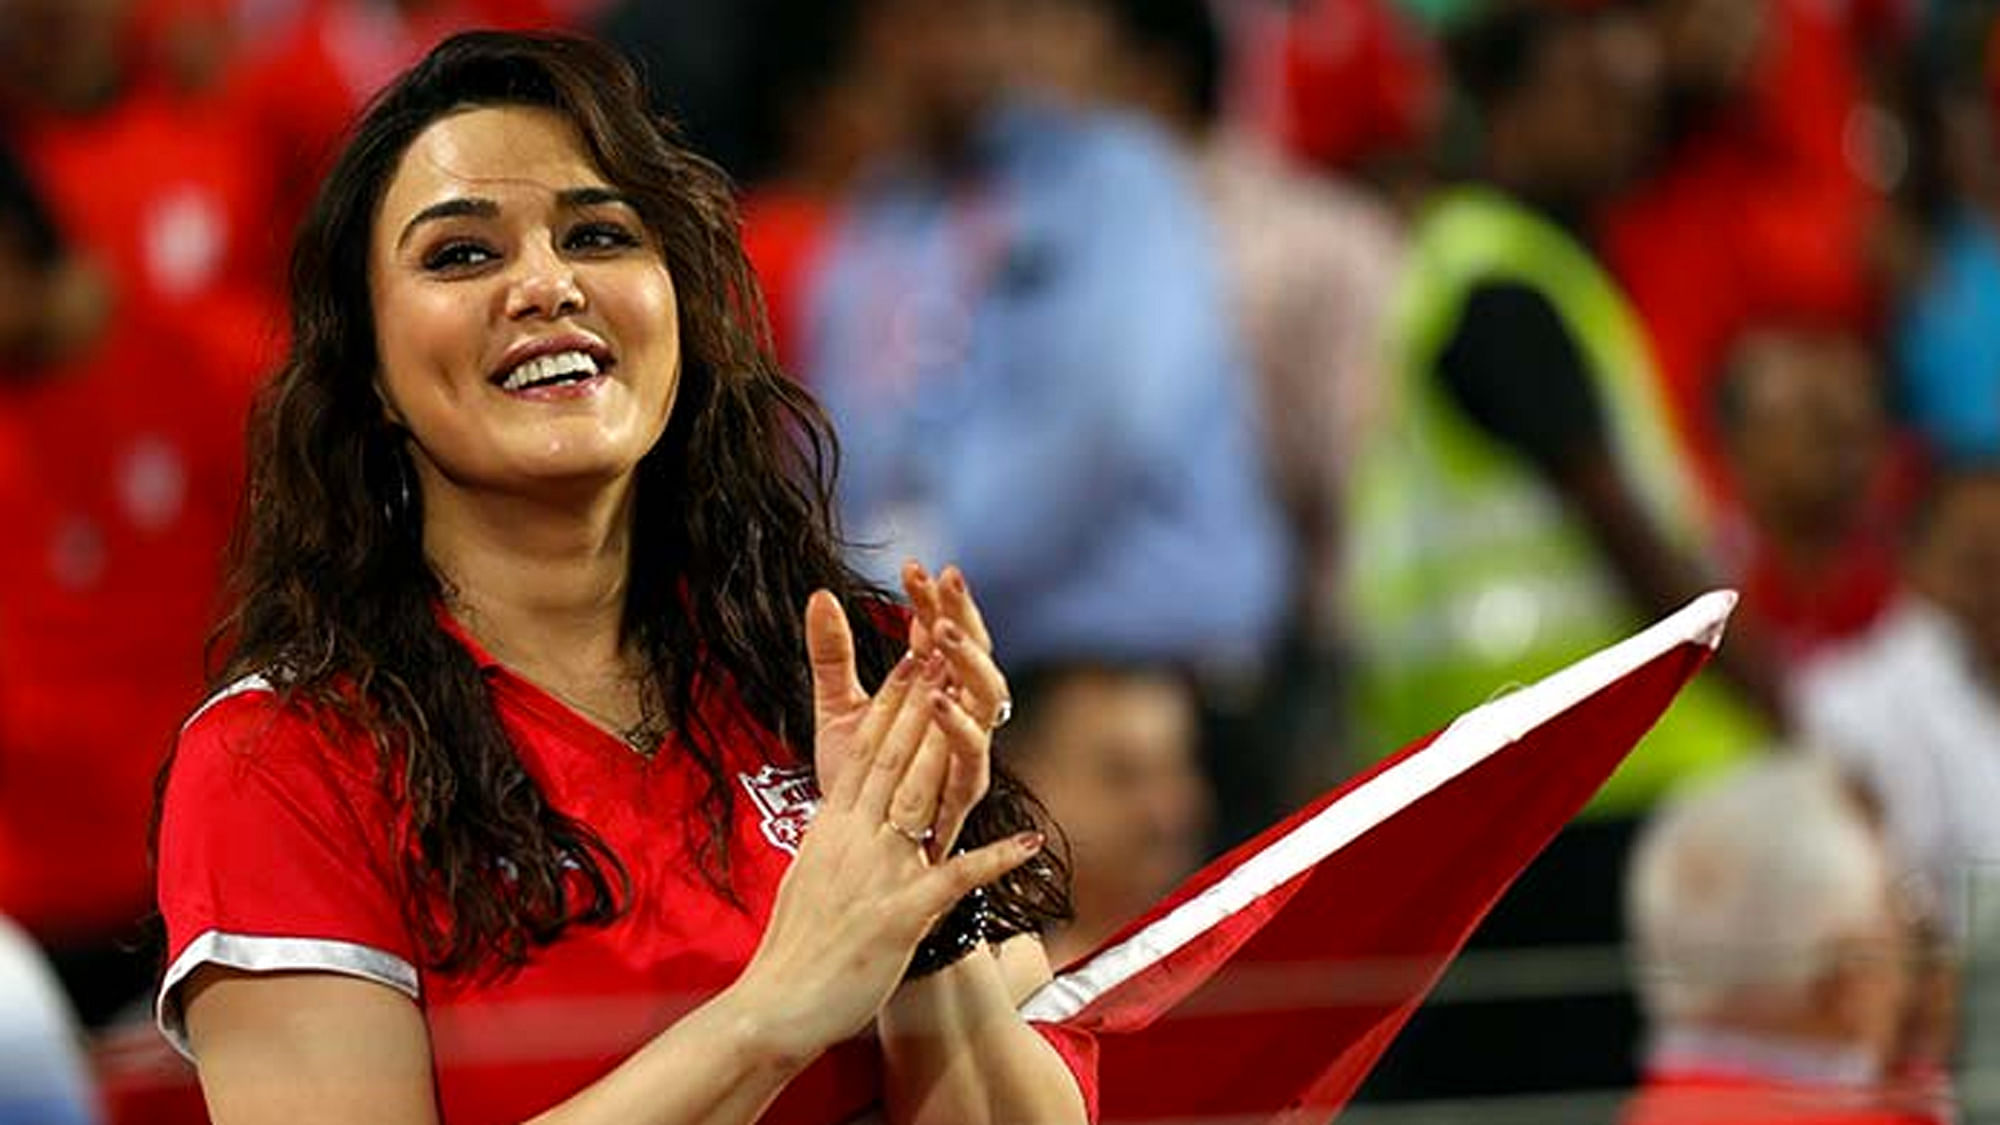 An enthusiastic Preity Zinta cheering on her IPL team Kings XI Punjab at a match.